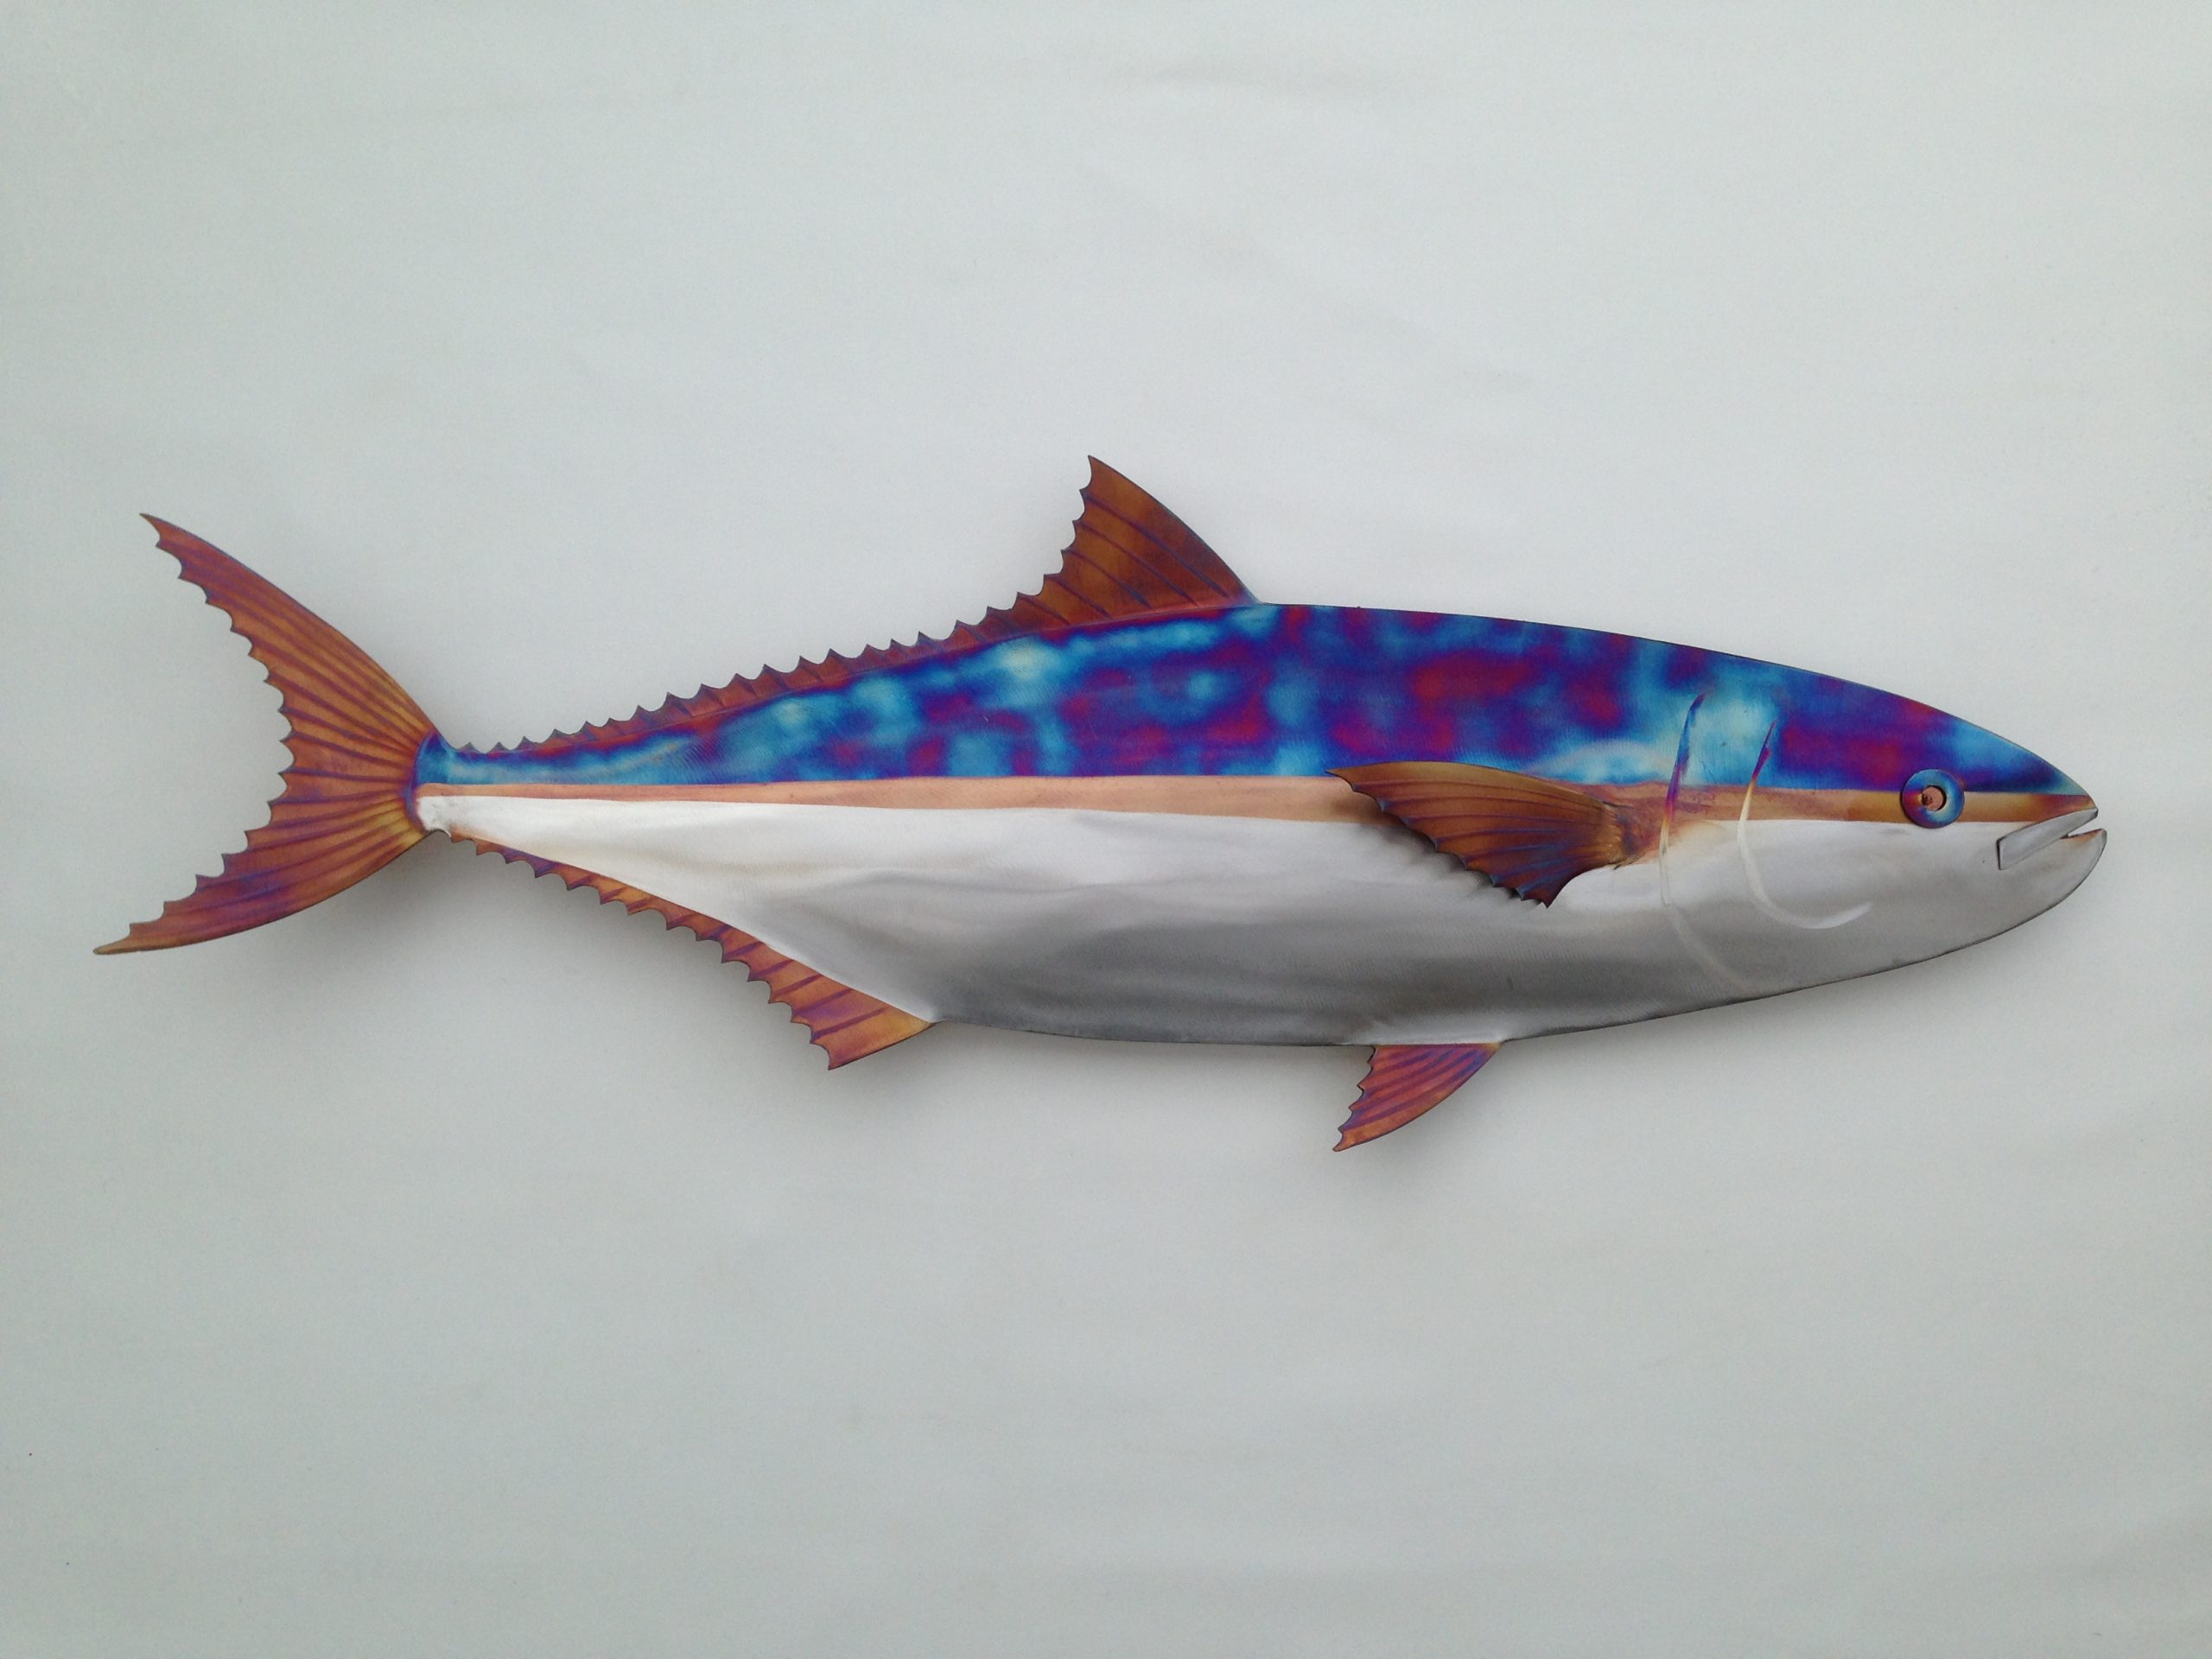 Stainless Steel Kingfish - Sculpted Metals Art Gallery - Kingfish ...